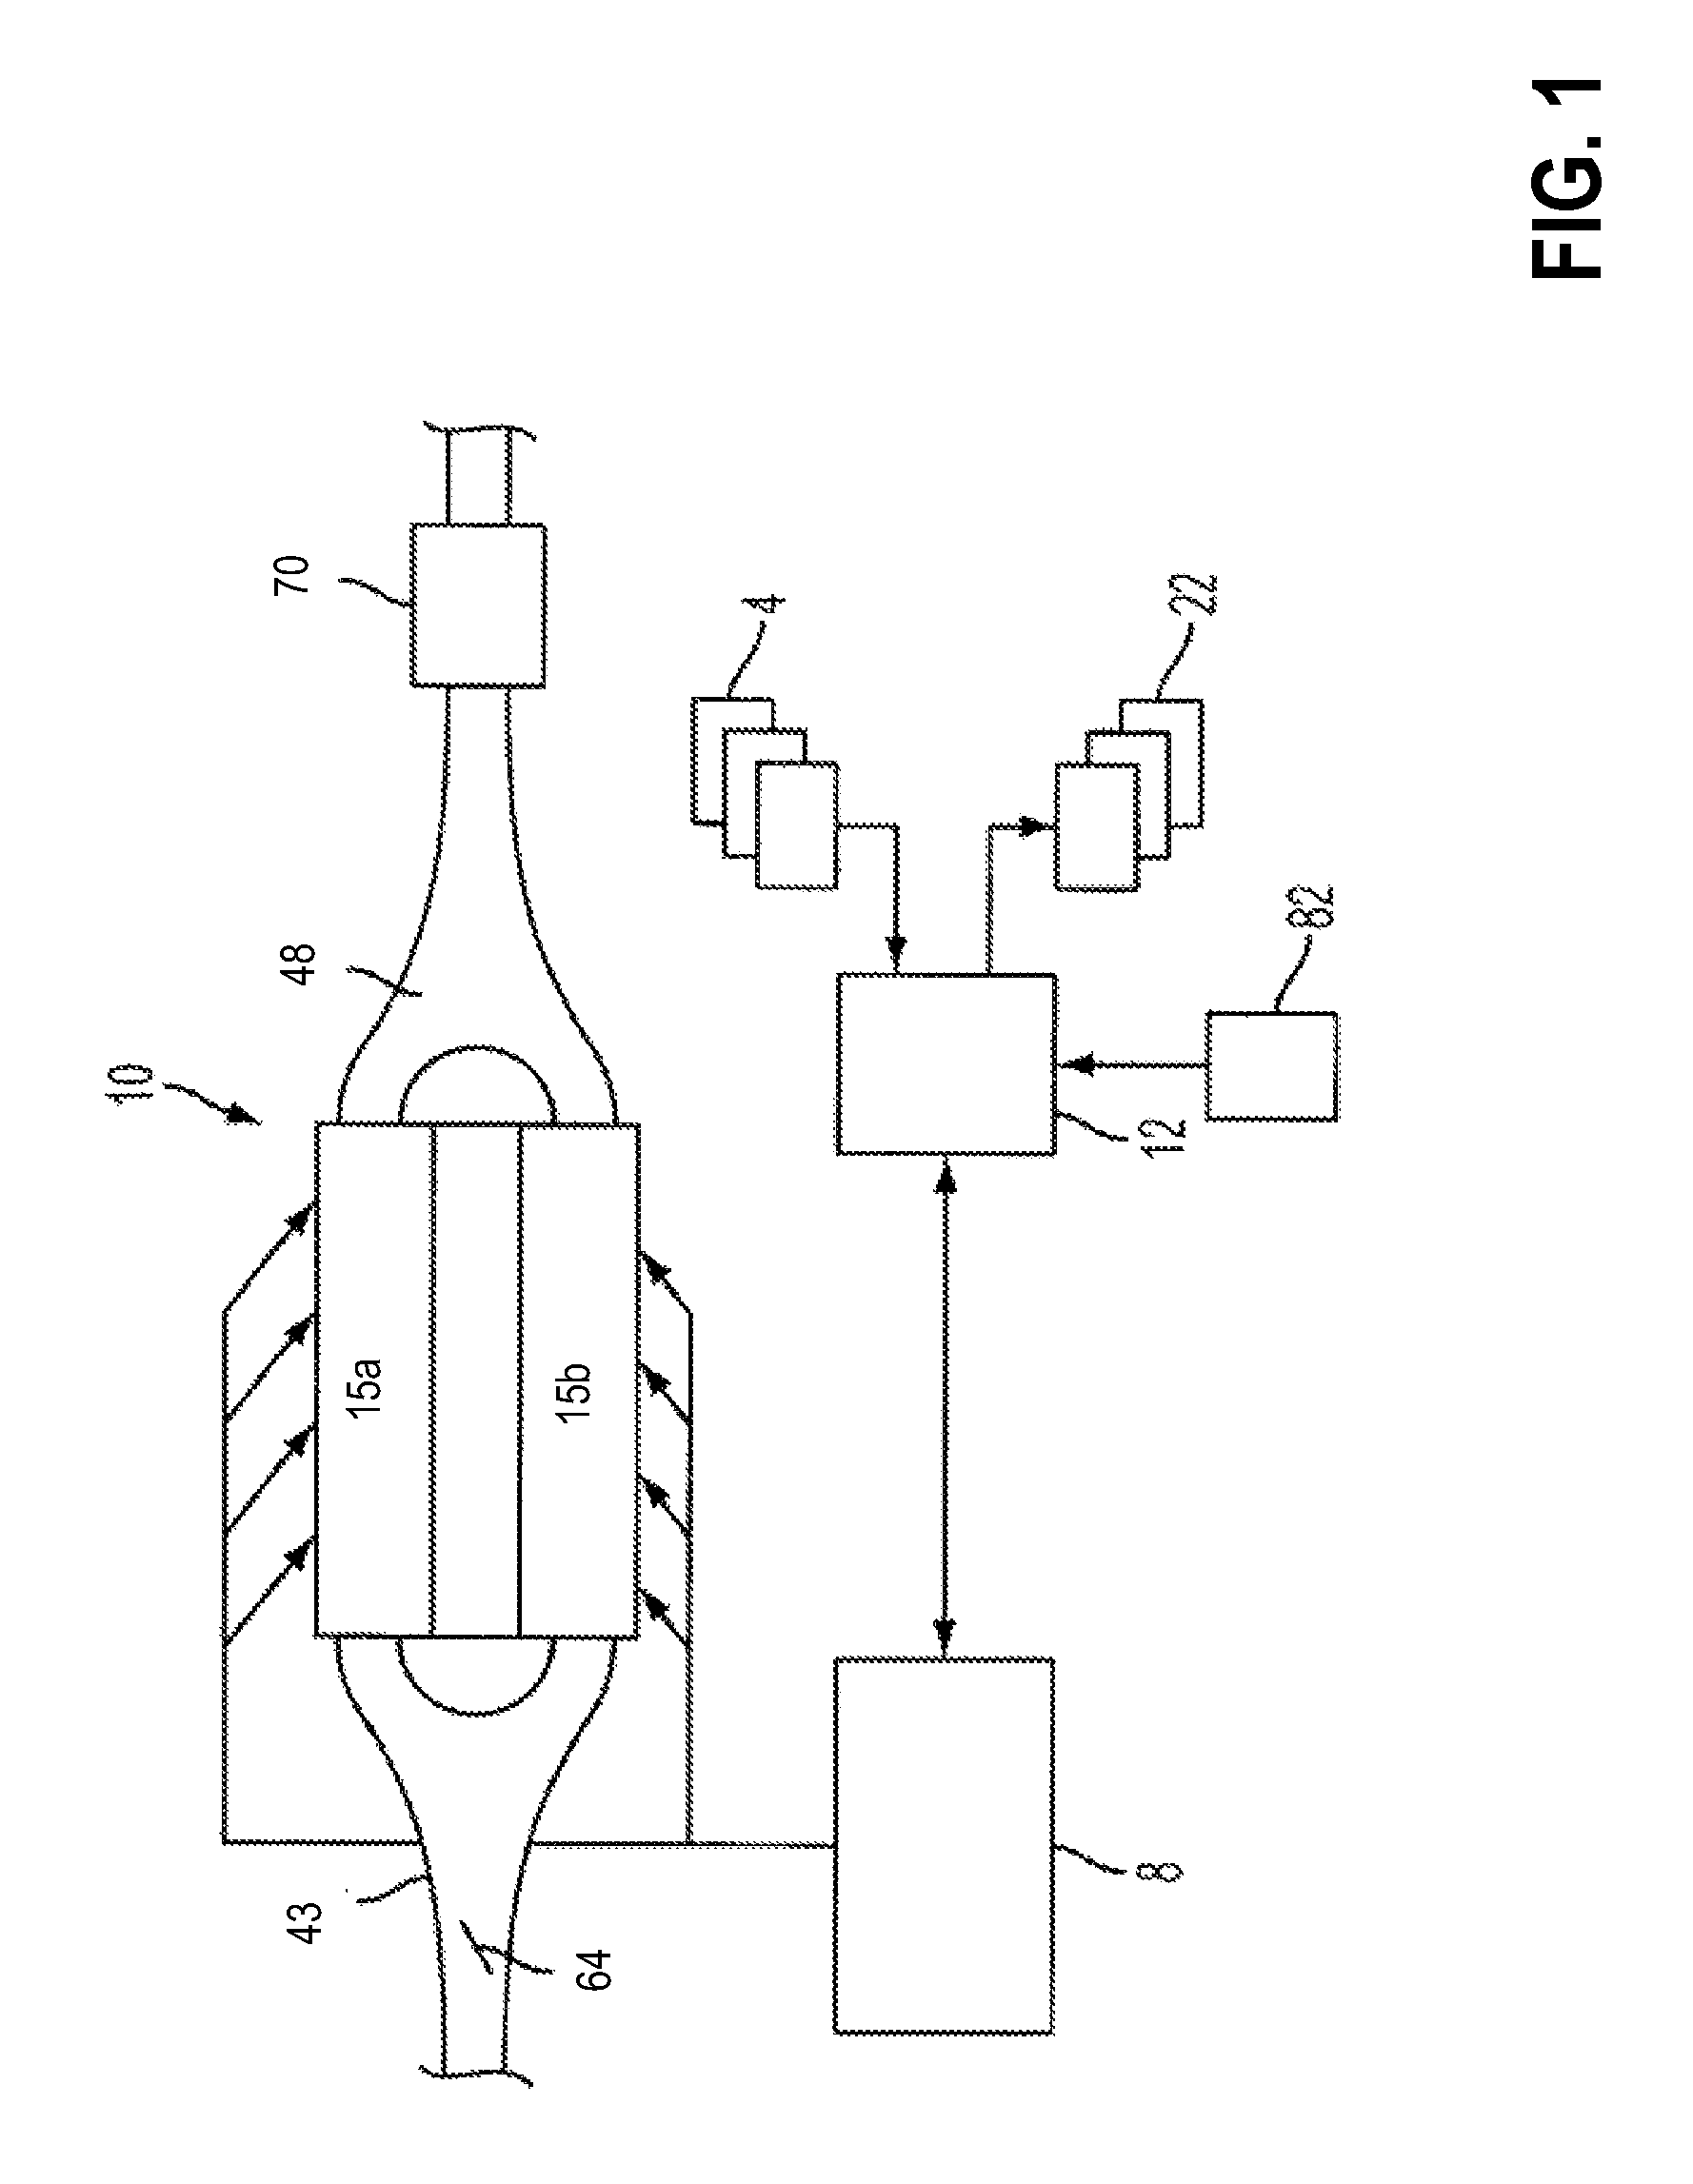 Method of fuel injection for a variable displacement engine